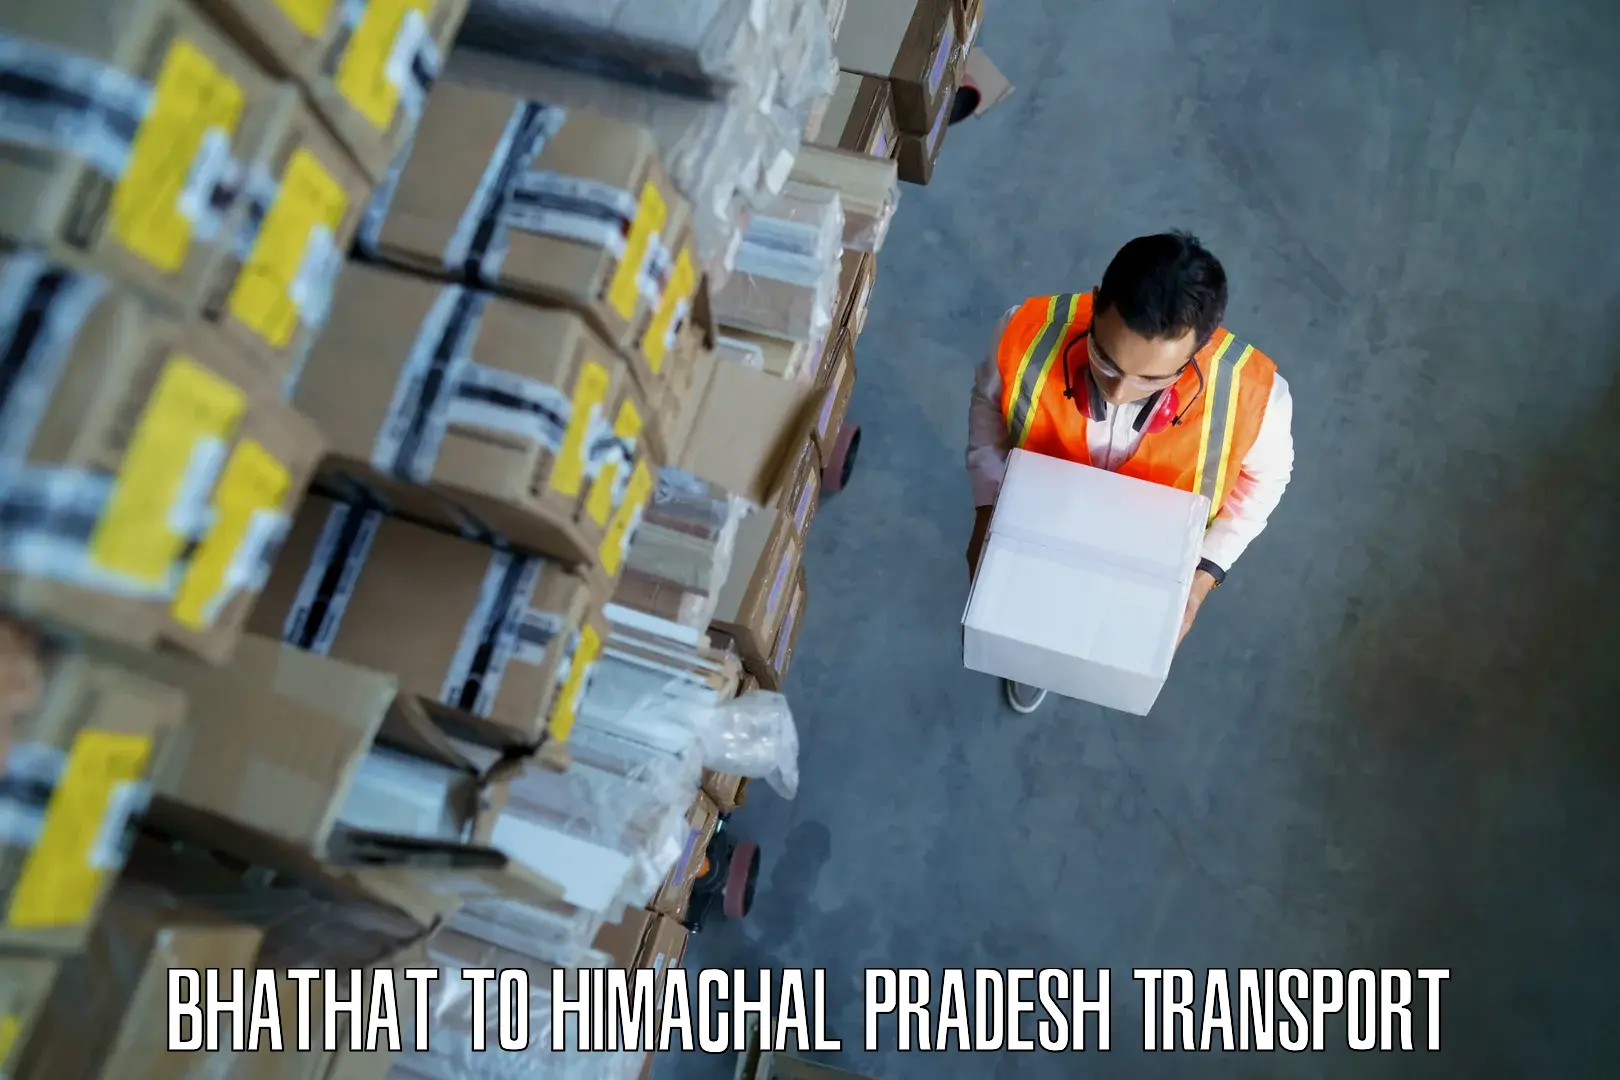 Truck transport companies in India Bhathat to Manali